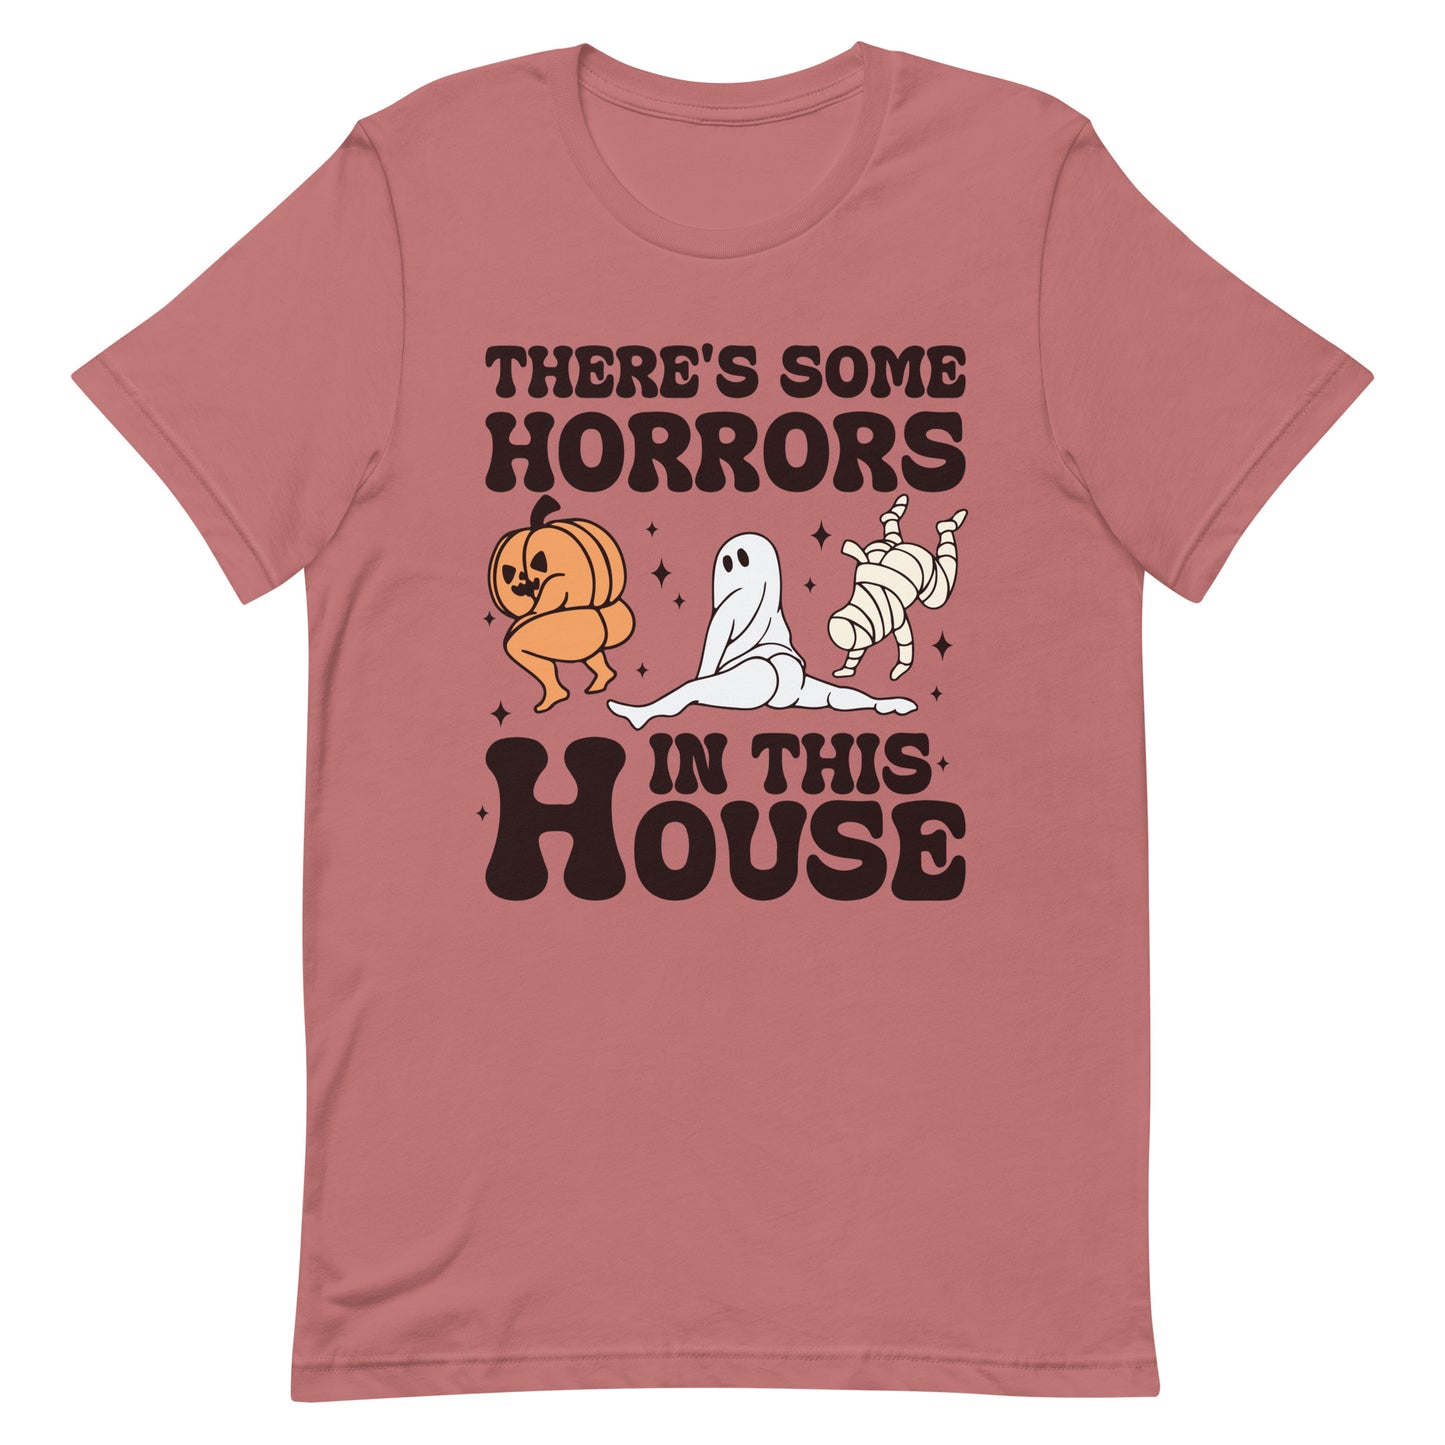 There's some horrors in this house t-shirt